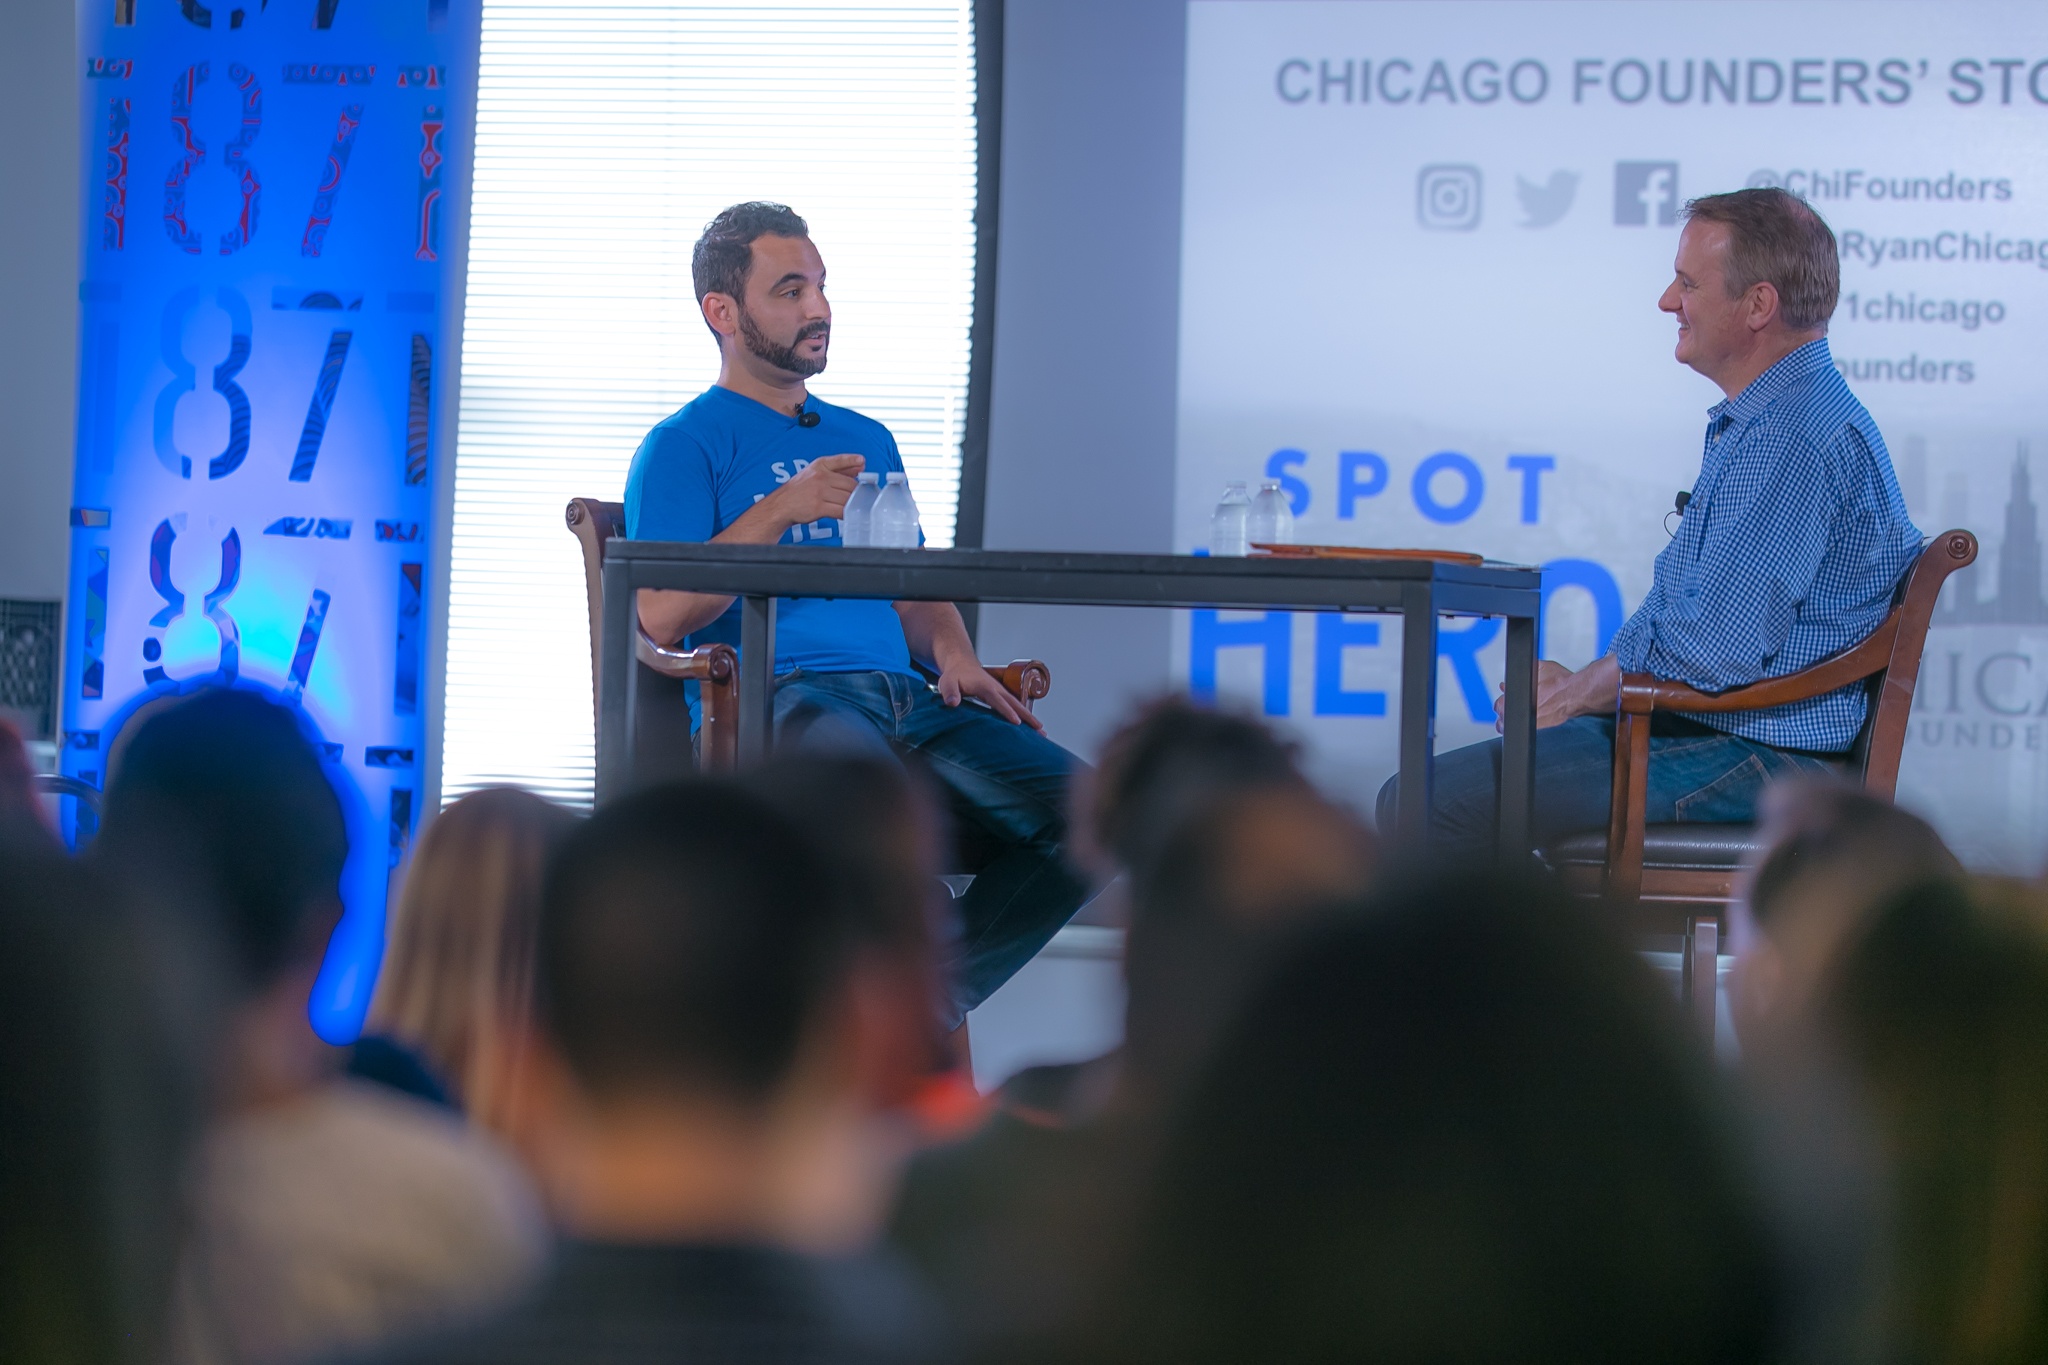 Chicago Founders' Stories ft. Mark Lawrence, Founder of SpotHero